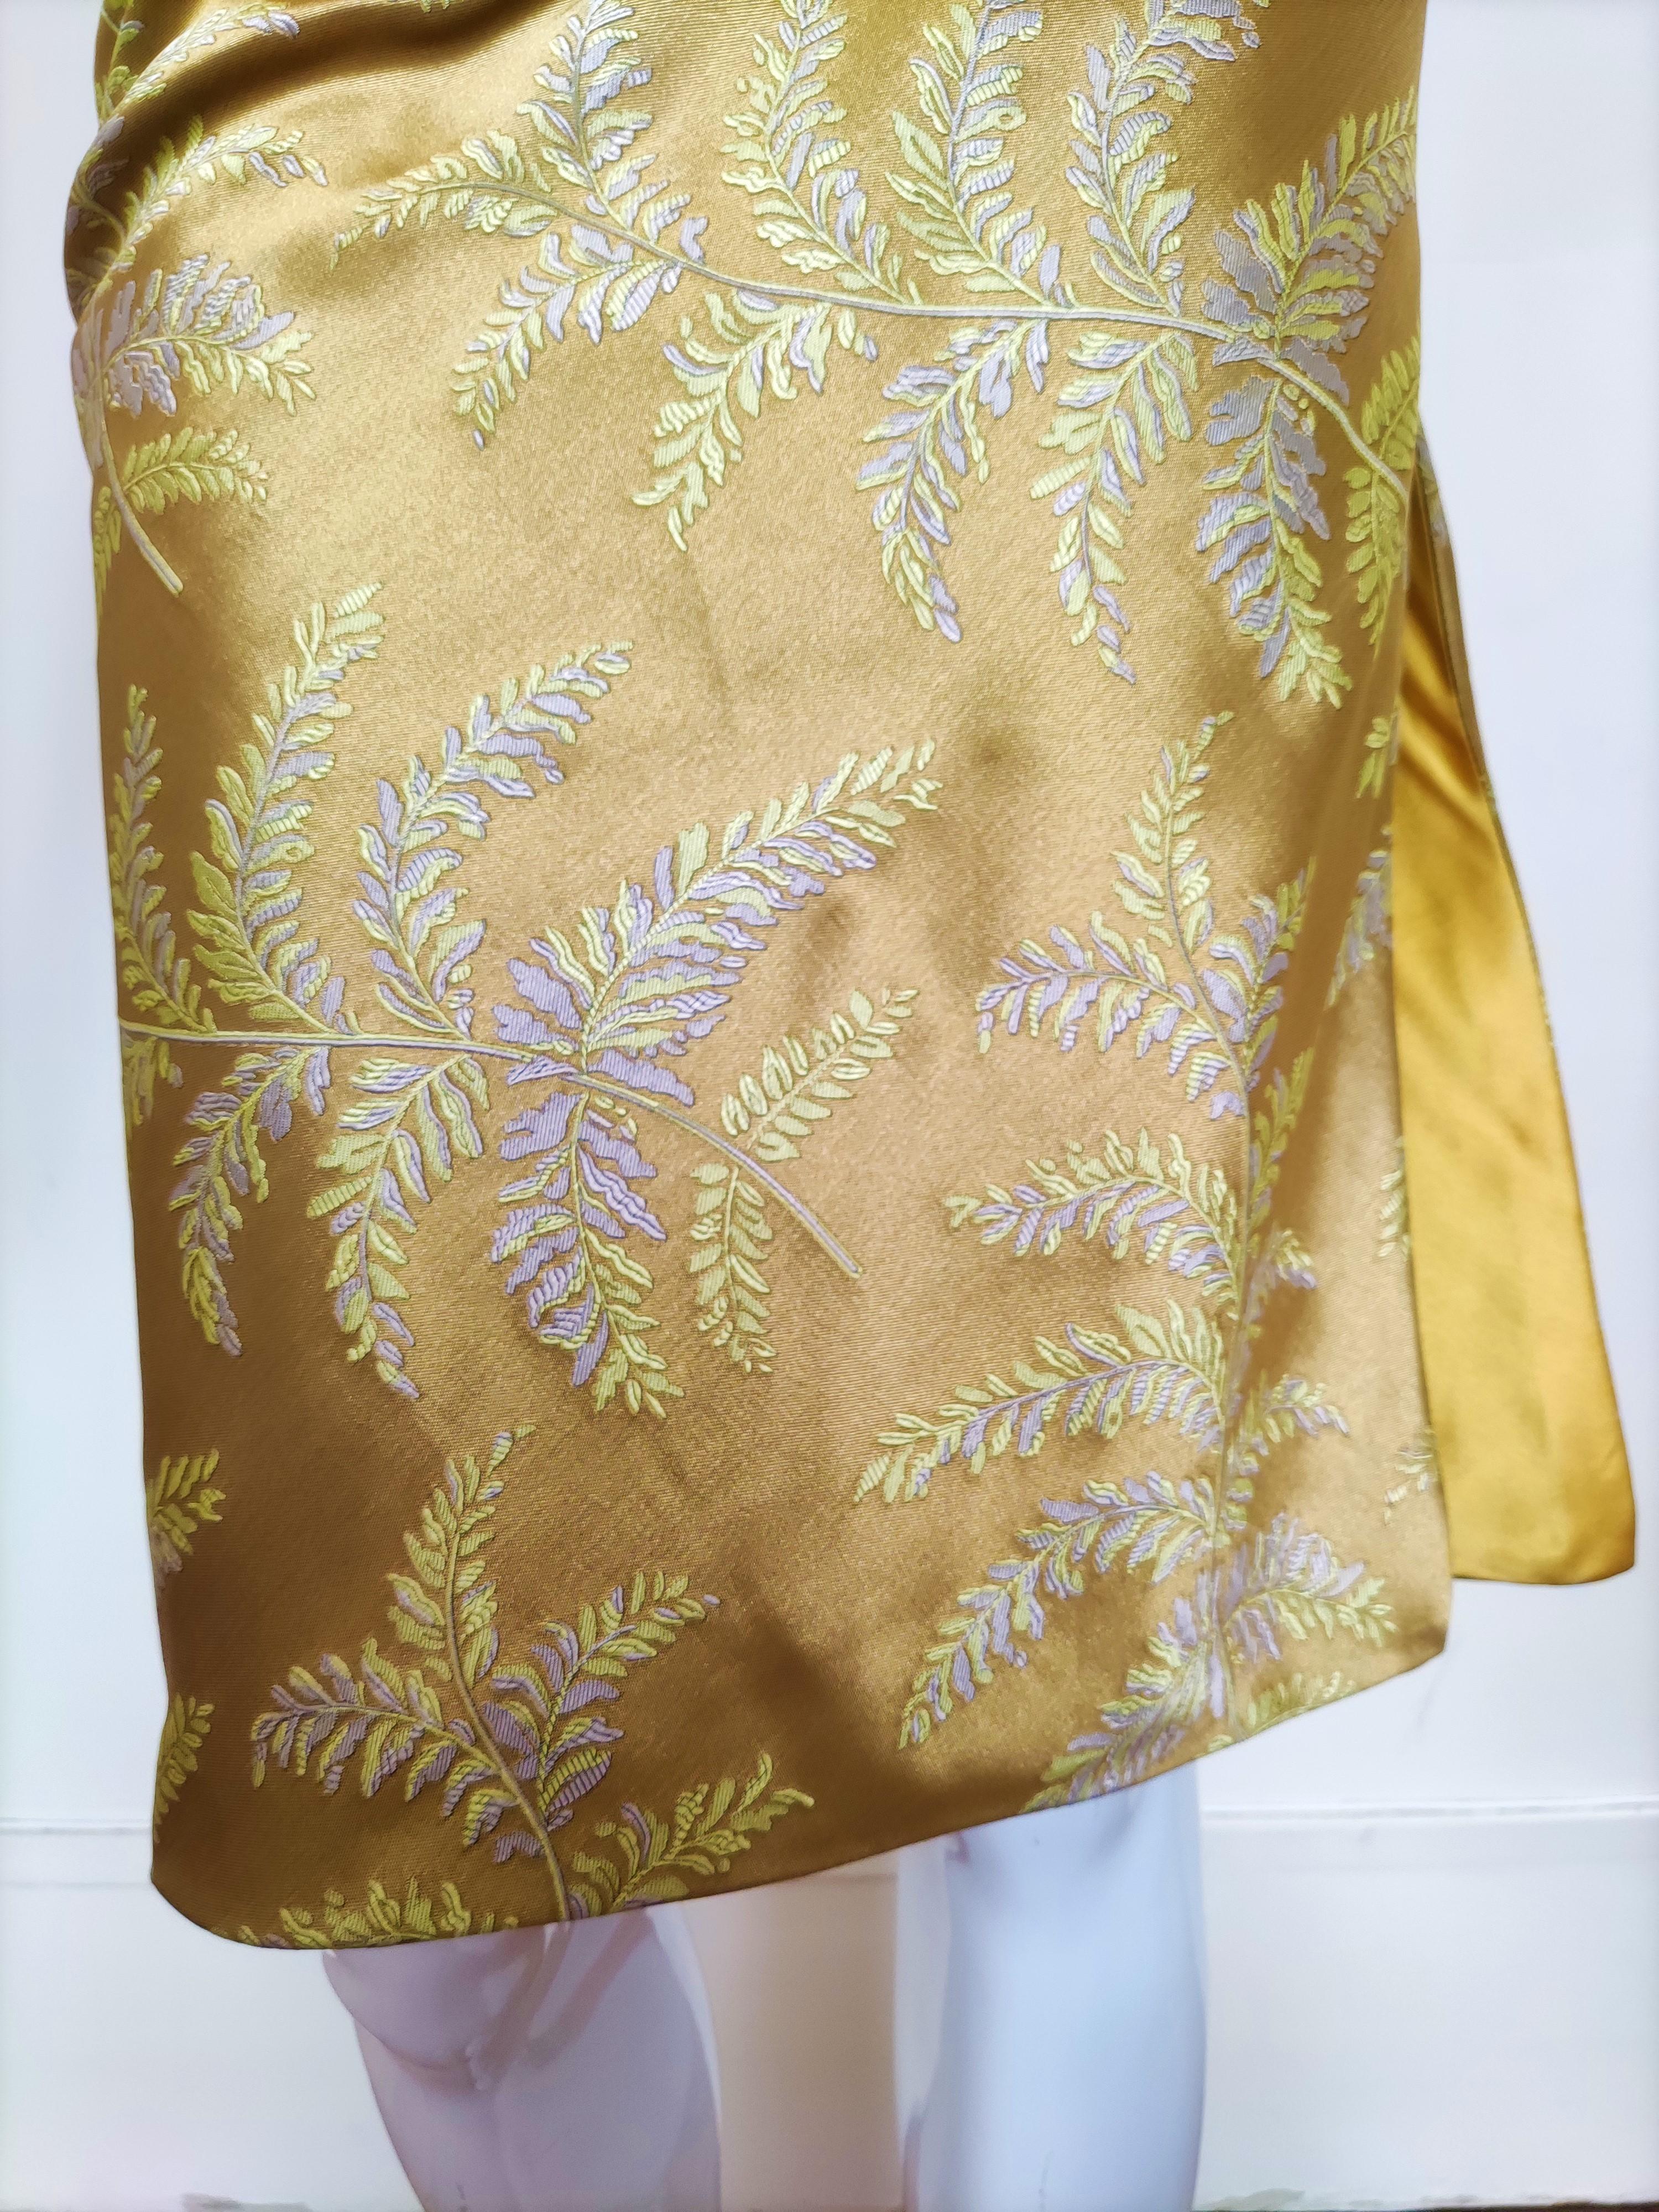 Atelier Gianni Versace Silk Mustard Yellow Floral Leaf Evening Baroque Dress For Sale 8